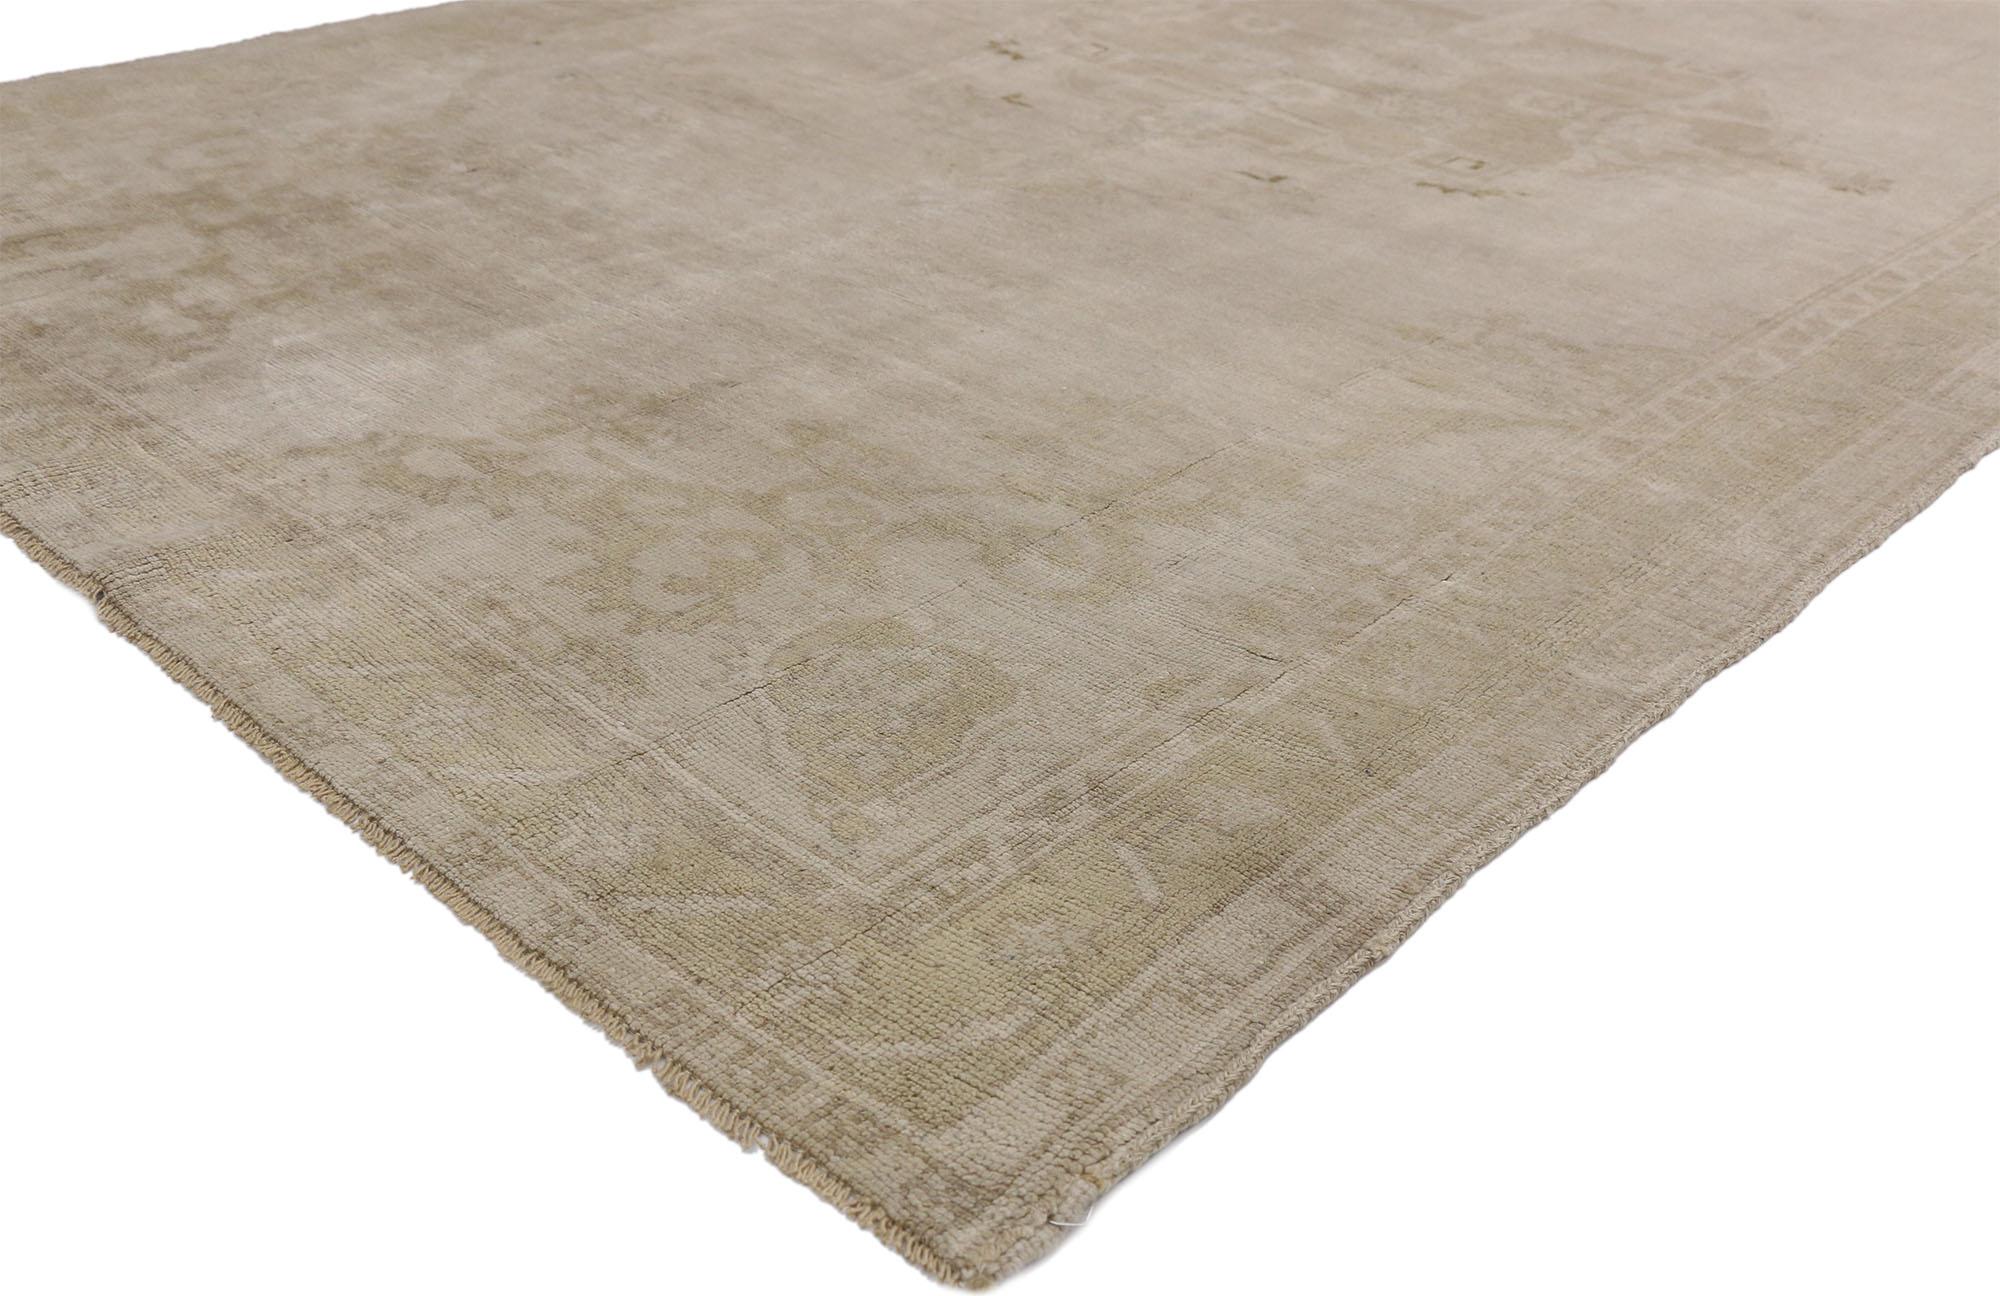 52477, Vintage Turkish Oushak Rug with Rustic American Colonial Style. Showcasing timeless elegance in a muted color palette this hand knotted wool Vintage Turkish Oushak rug features a demure center medallion with elaborate spandrels in shades of